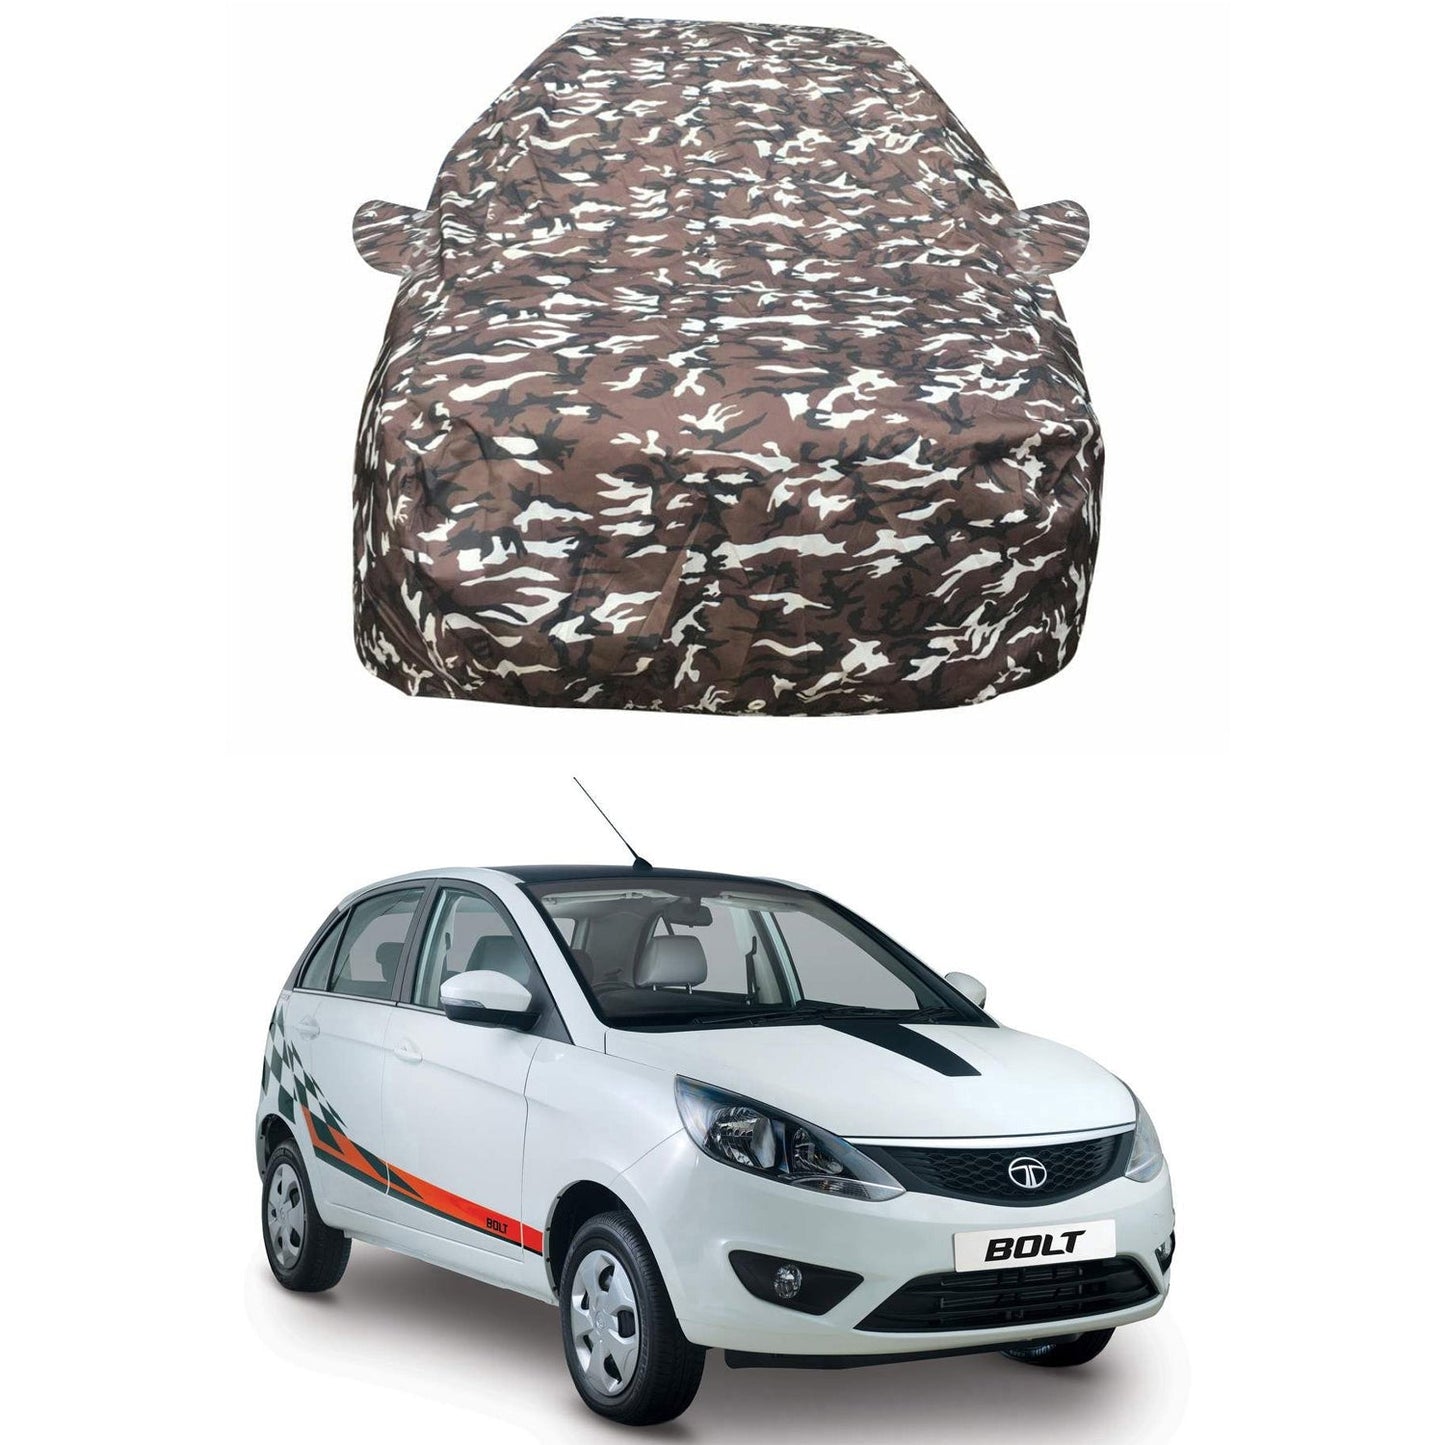 Oshotto Ranger Design Made of 100% Waterproof Fabric Car Body Cover with Mirror Pocket For Tata Bolt